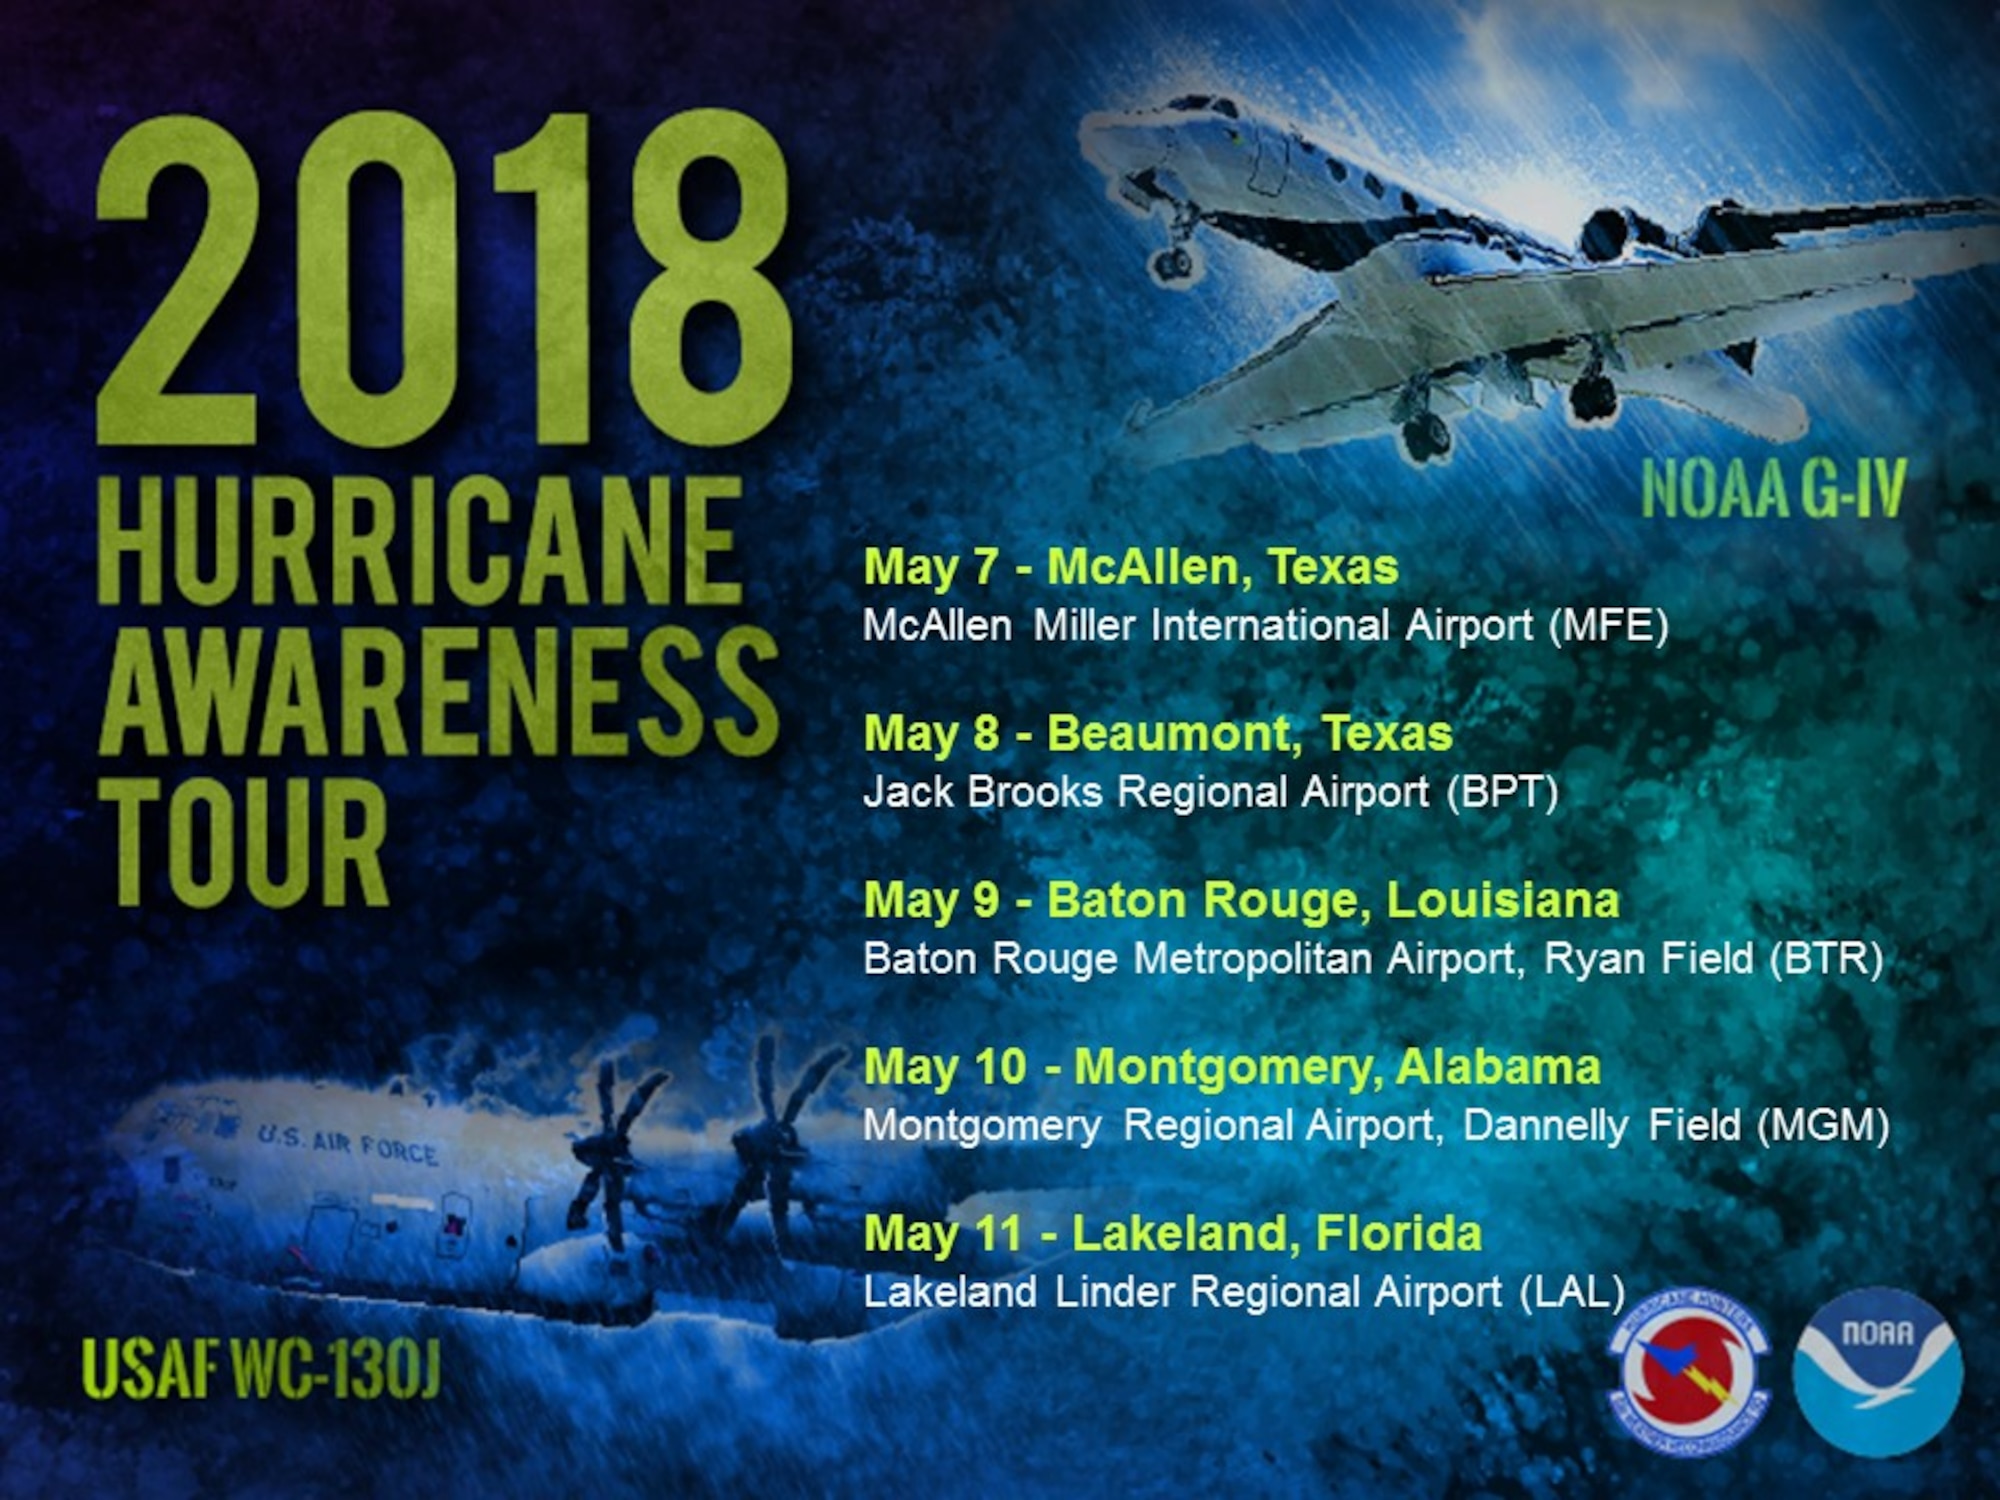 In effort to build a Weather-Ready Nation ahead of this year’s Atlantic hurricane season, NOAA’s hurricane experts will tour five U.S. Gulf Coast cities from May 7-11 to raise awareness about the importance of preparing for the upcoming hurricane season. At each stop, the public and media can view the NOAA Gulfstream IV aircraft, which flies ahead of a storm, and take a tour inside a U.S. Air Force Reserve WC-130J hurricane hunter aircraft, which flies directly through the eye of a storm. (NOAA graphic)